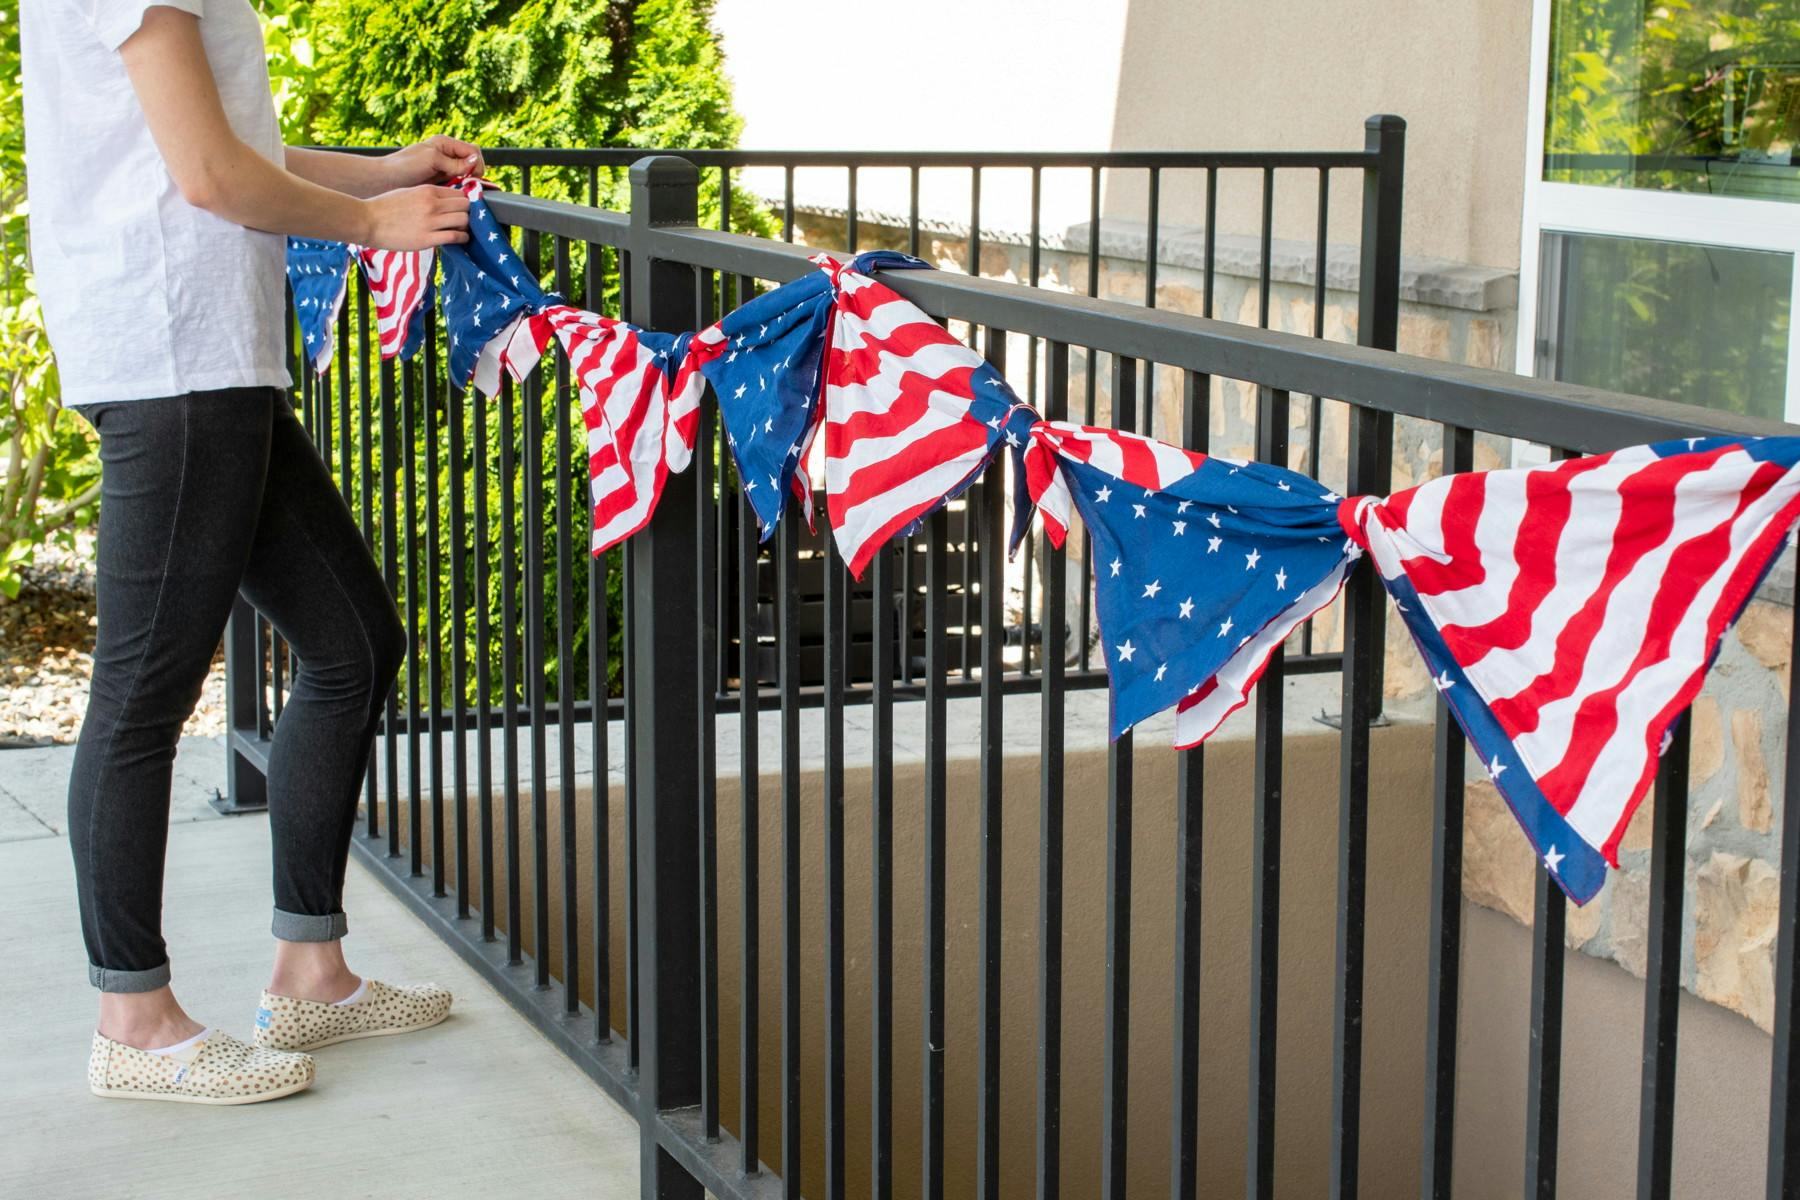 A person affixing a 4th of July bunting to a metal fence that was made by tying American flag bandanas together. 